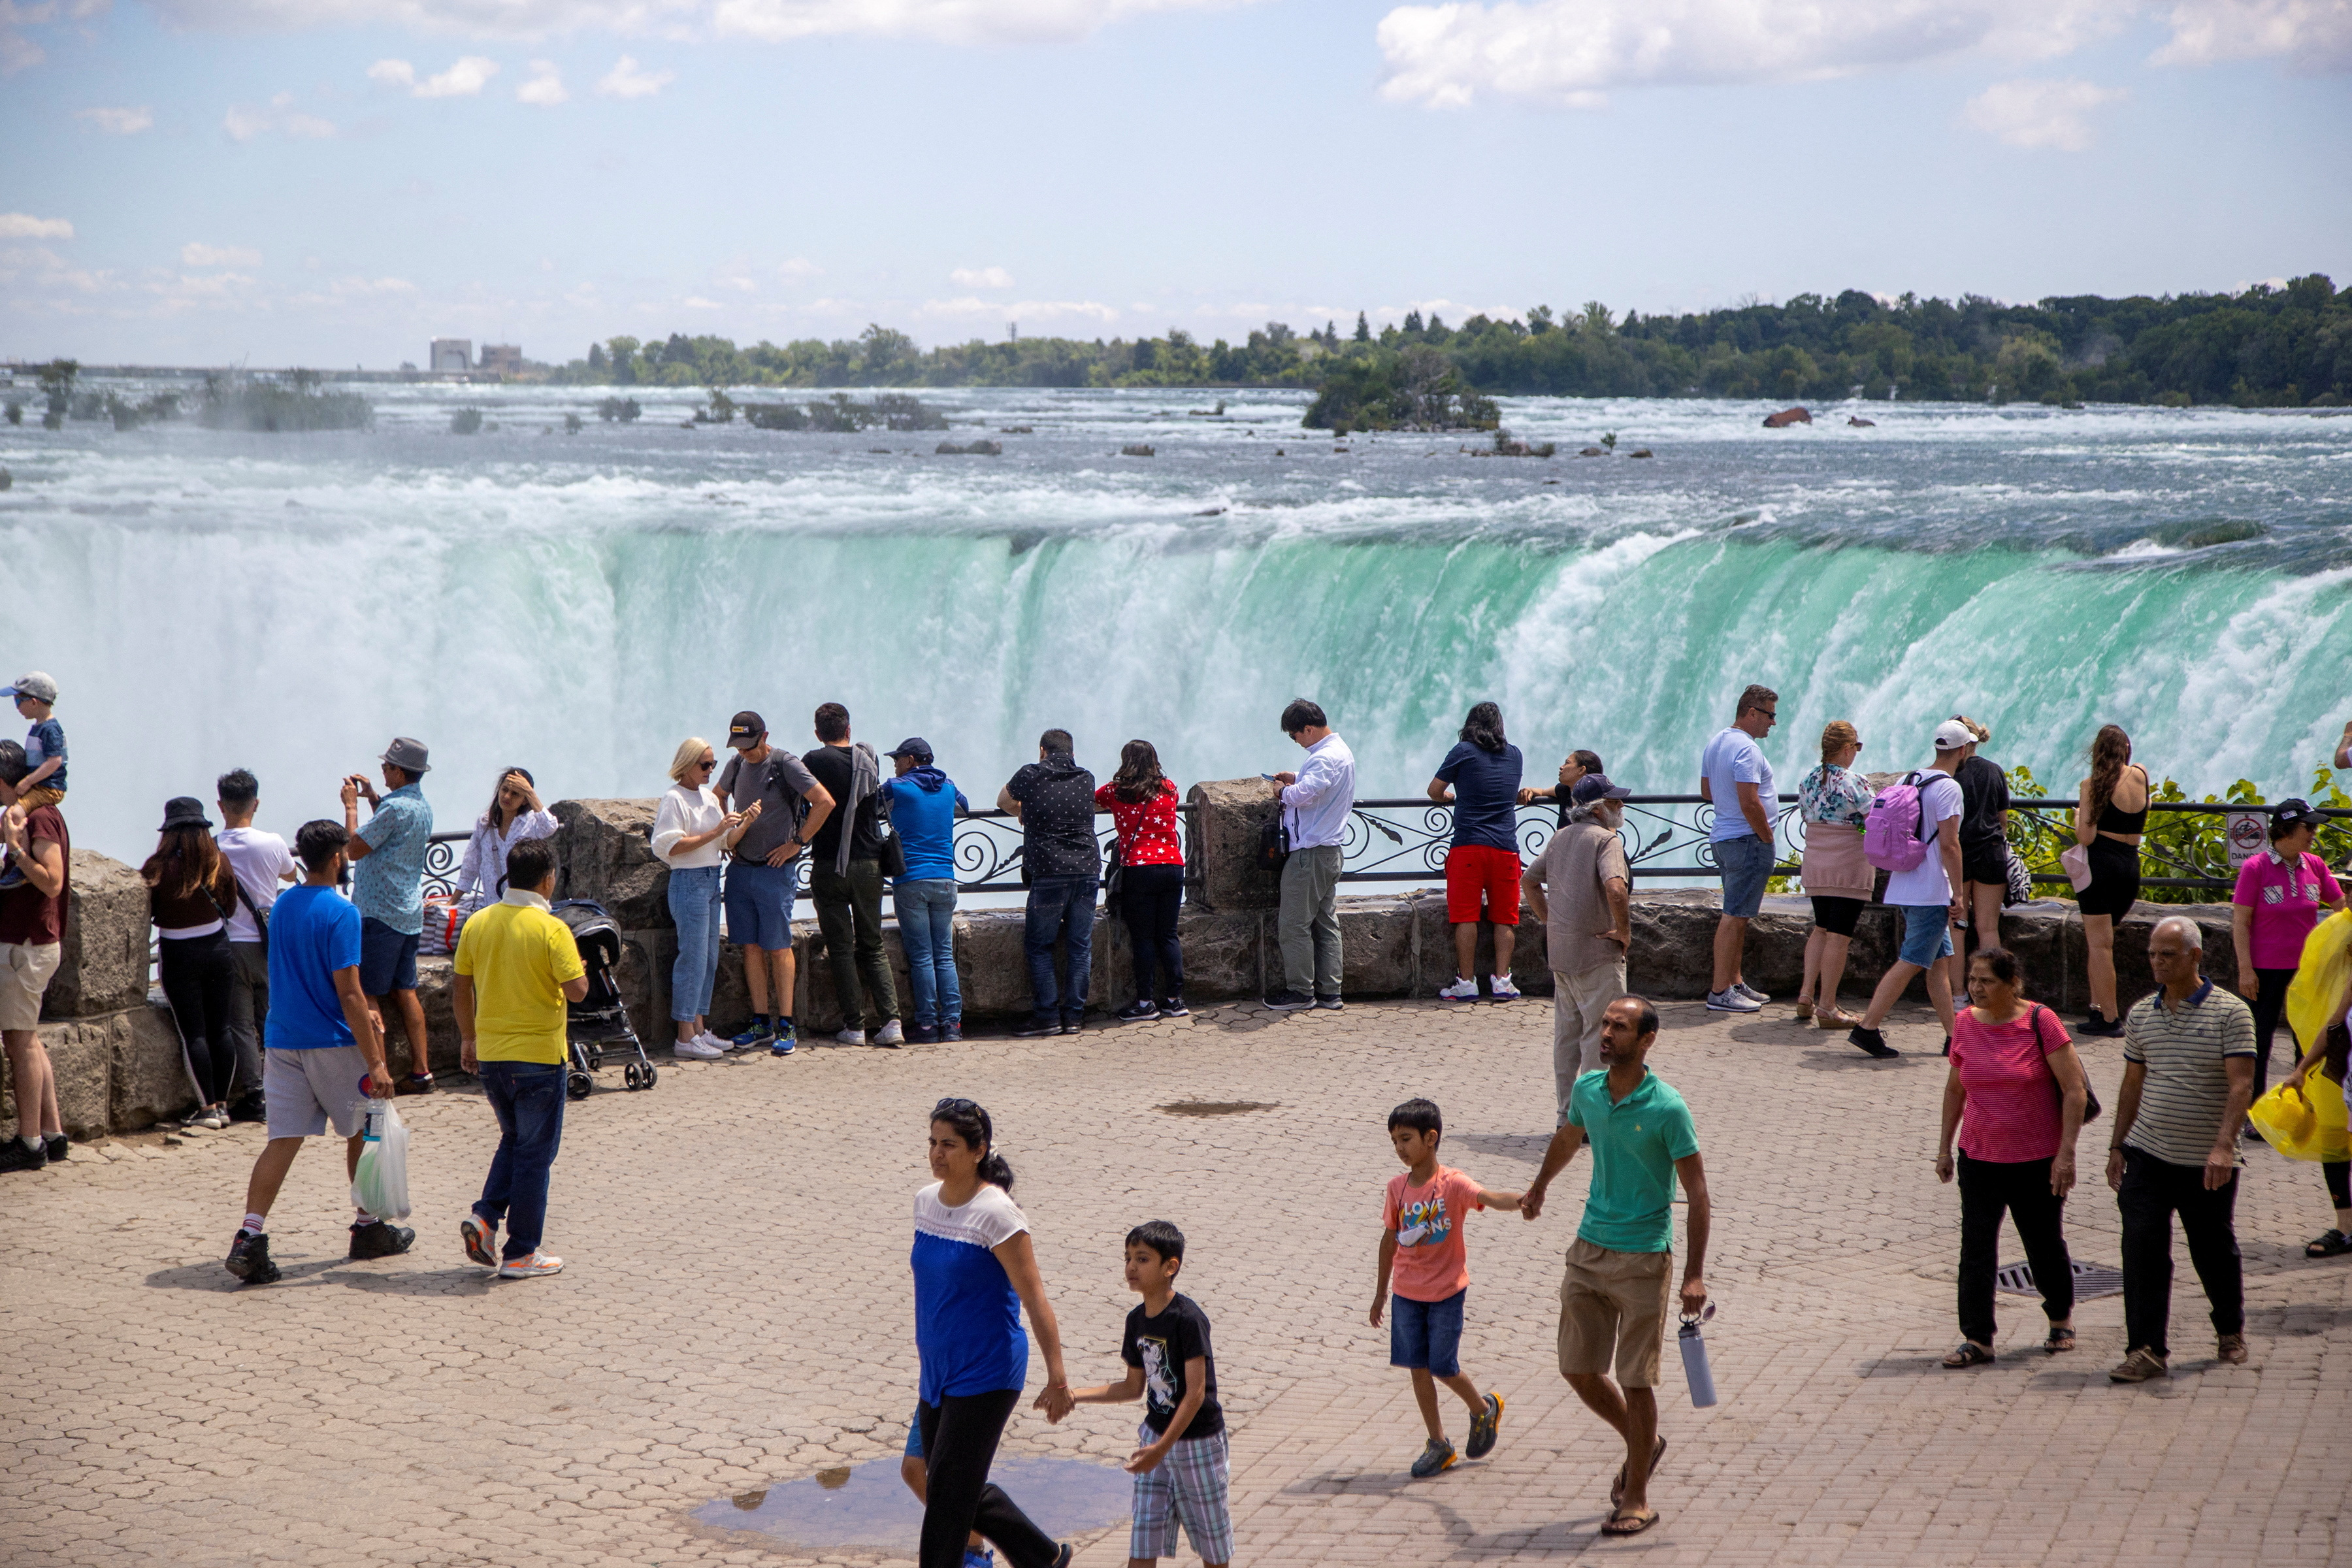 Tourist take photos in front of the Horsehoe Falls in Niagara Falls